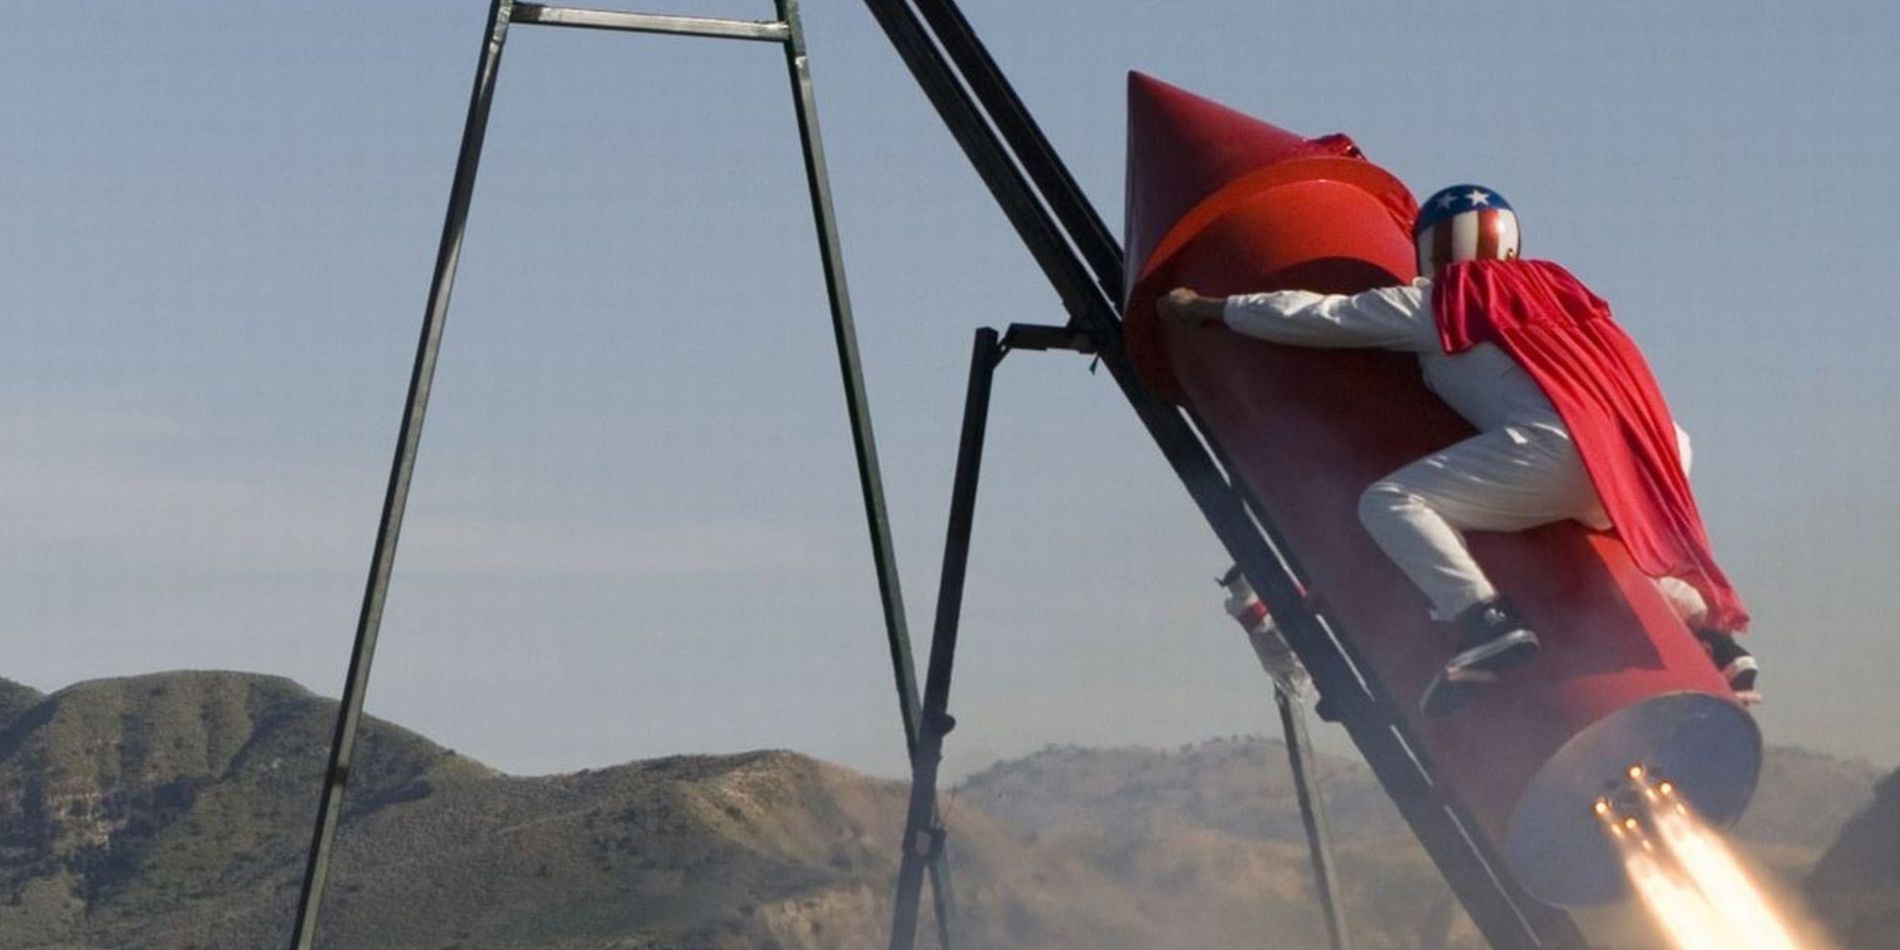 Johnny Knoxville sits on a homemade rocket in Jackass Number Two